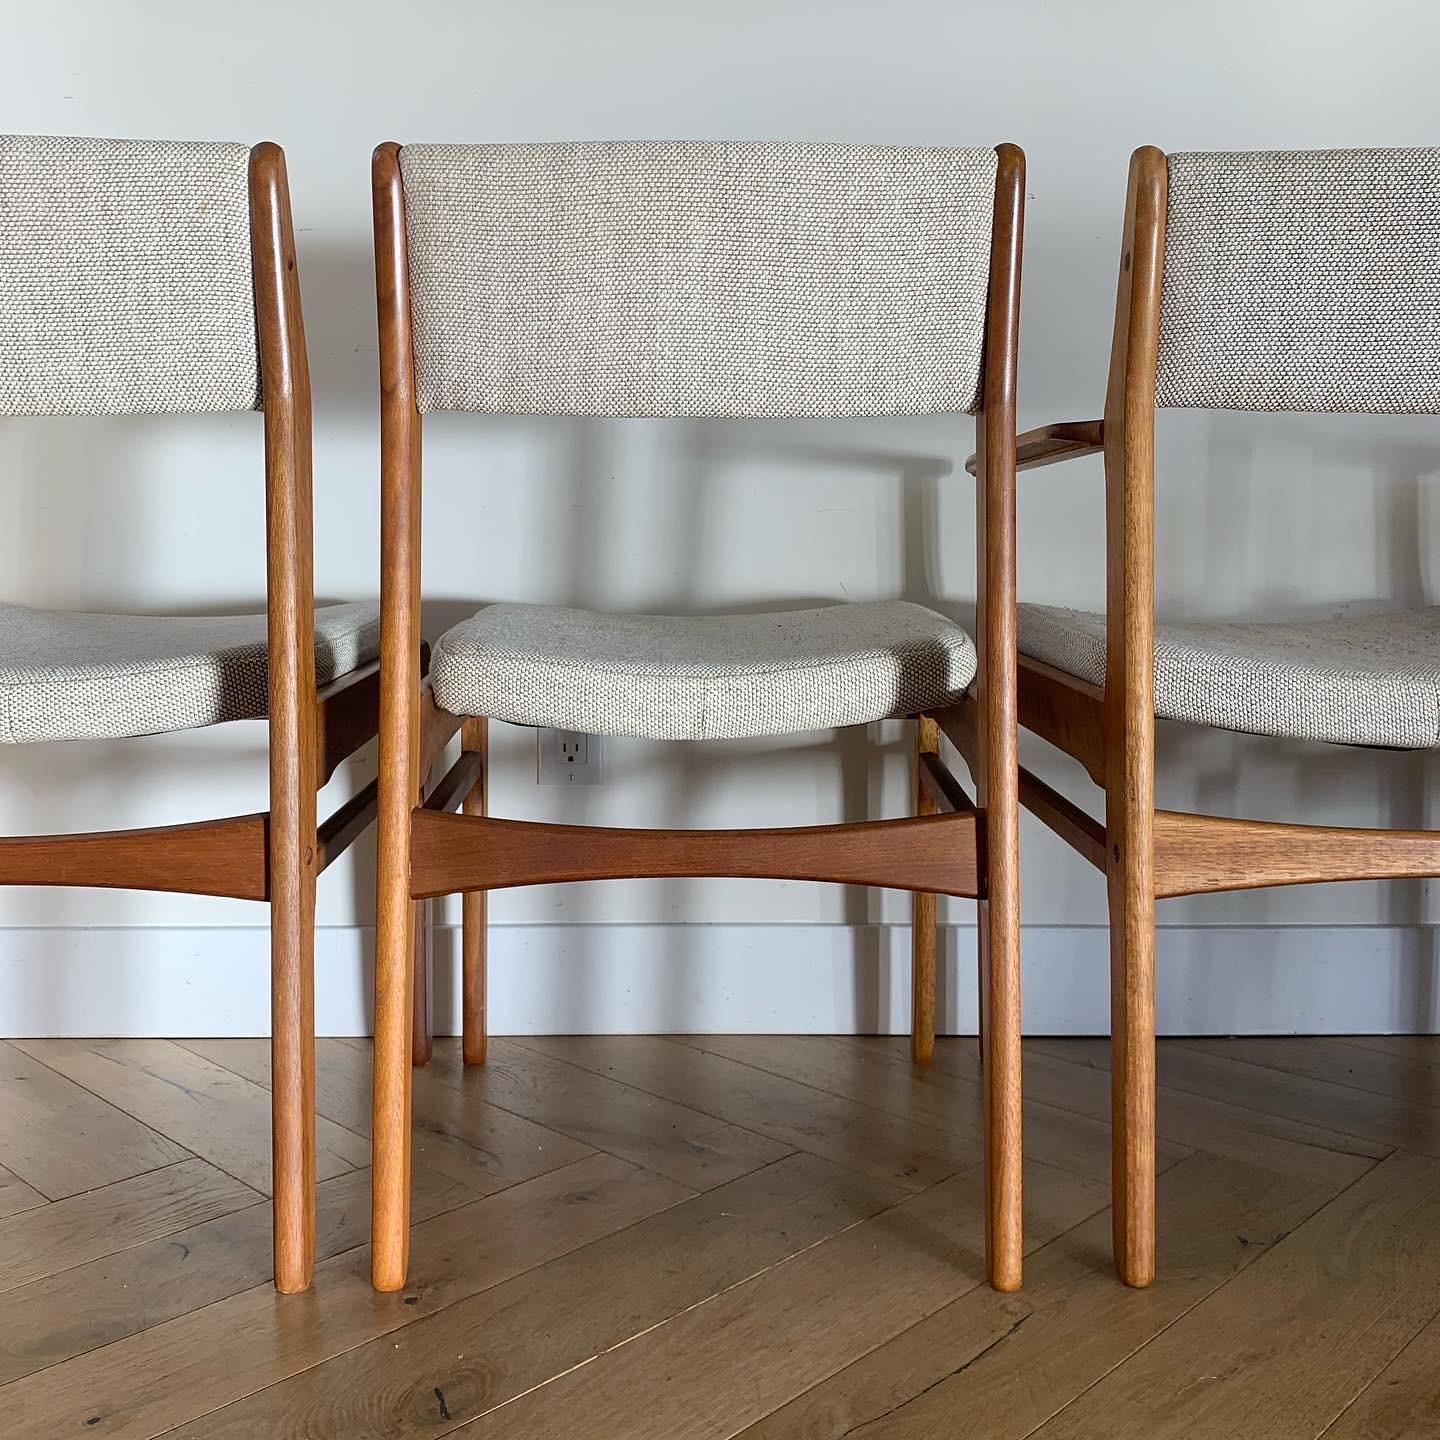 A set of 4 Danish mid-century teak chairs by Ligna, 1960s. Original upholstery is a linen bouclé blend in cream, nutmeg, and ecru. Two with arm rests and two sans. Signs of age include minor scratches and some wear to the upholstery but no glaring